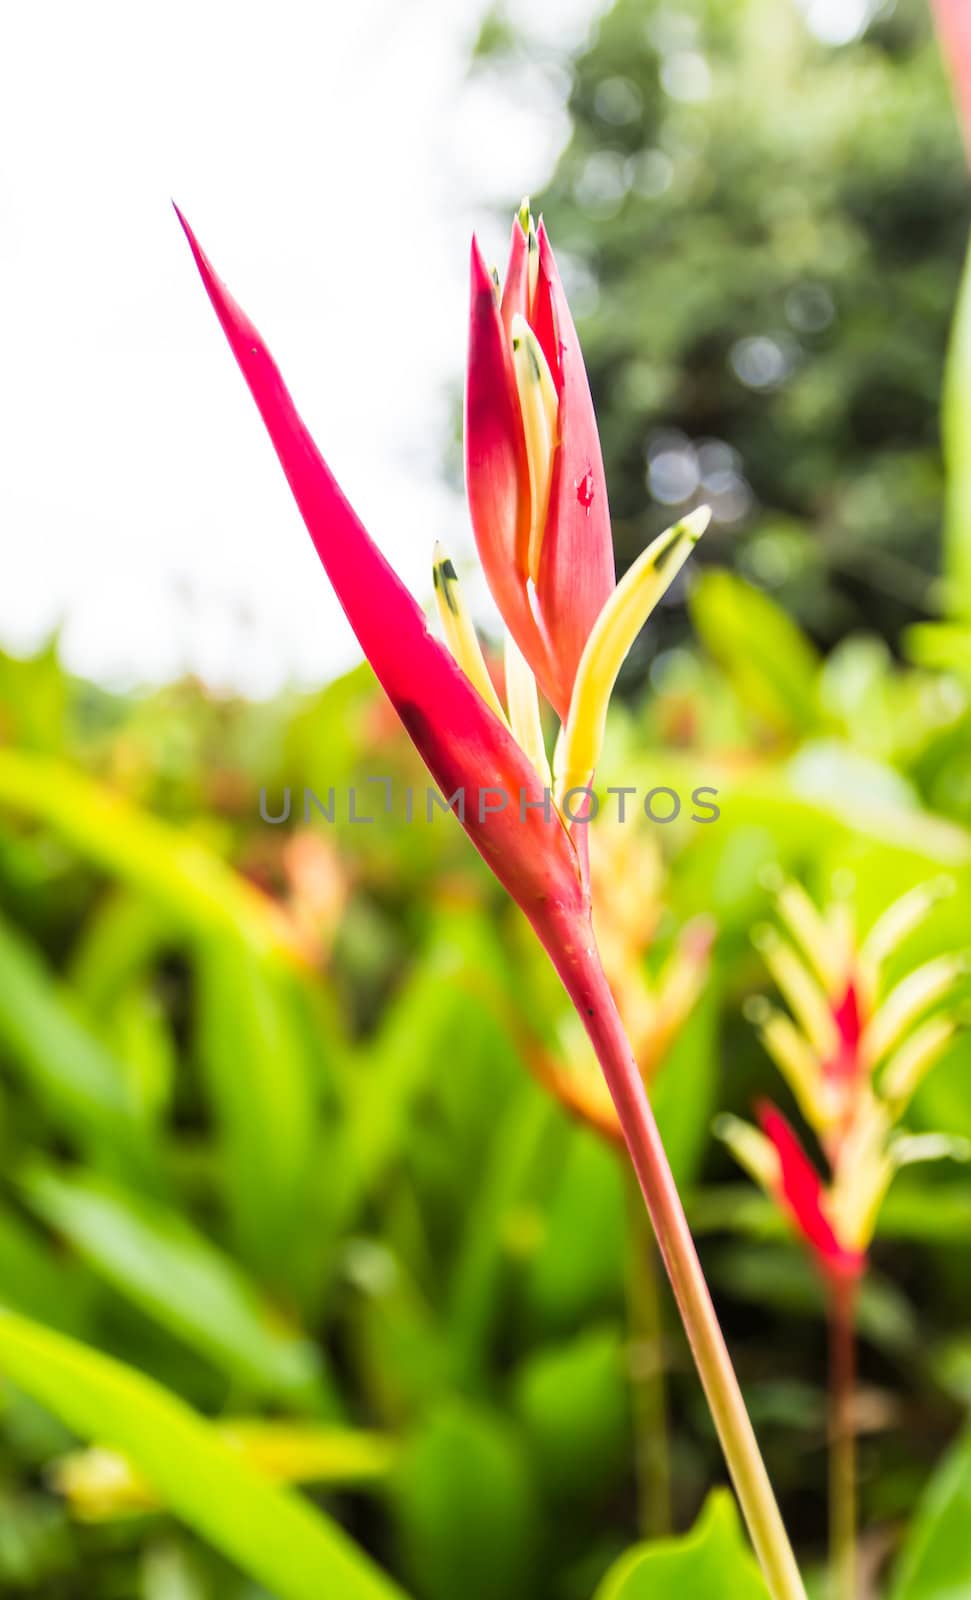 Heliconia flower blossom in garden on flowers at backgroud